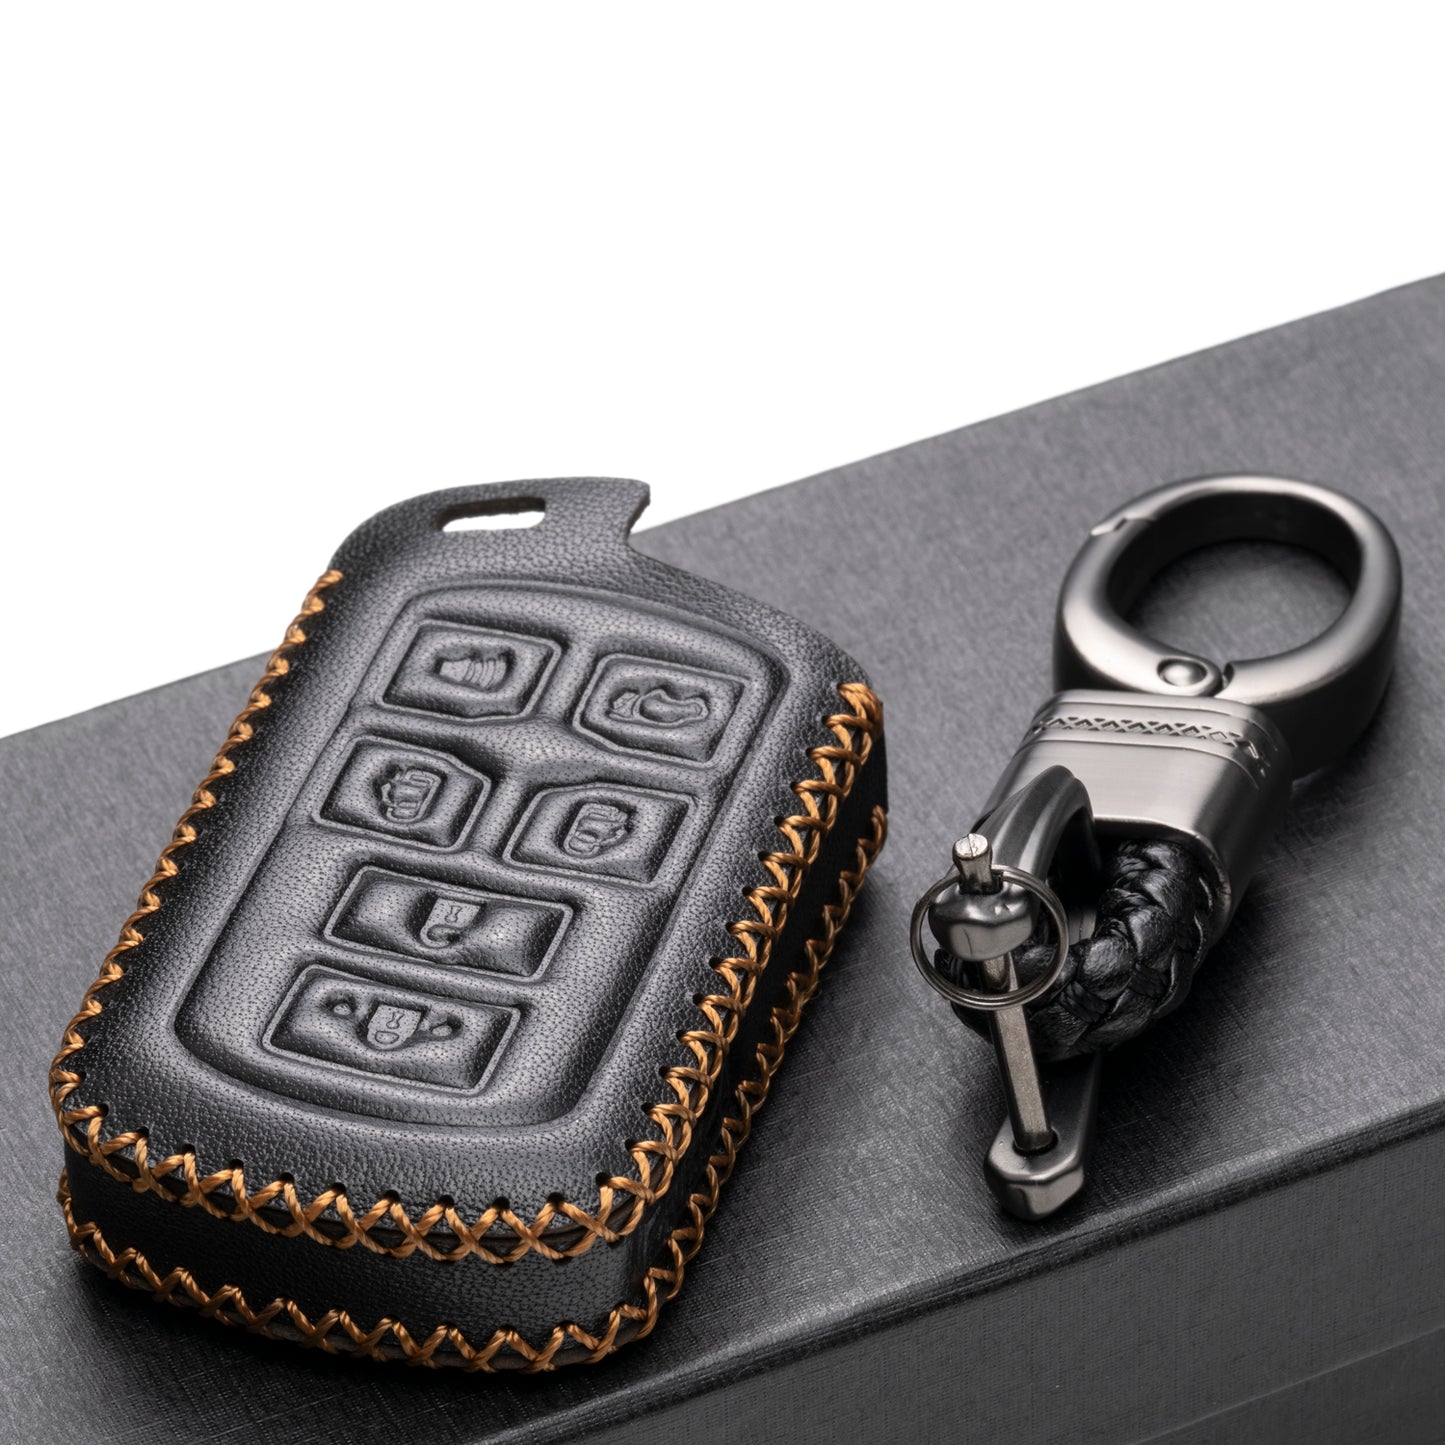 Vitodeco 6-Button Genuine Leather Smart Key Fob Case Cover with Compatible with Toyota Sienna 2011-2020